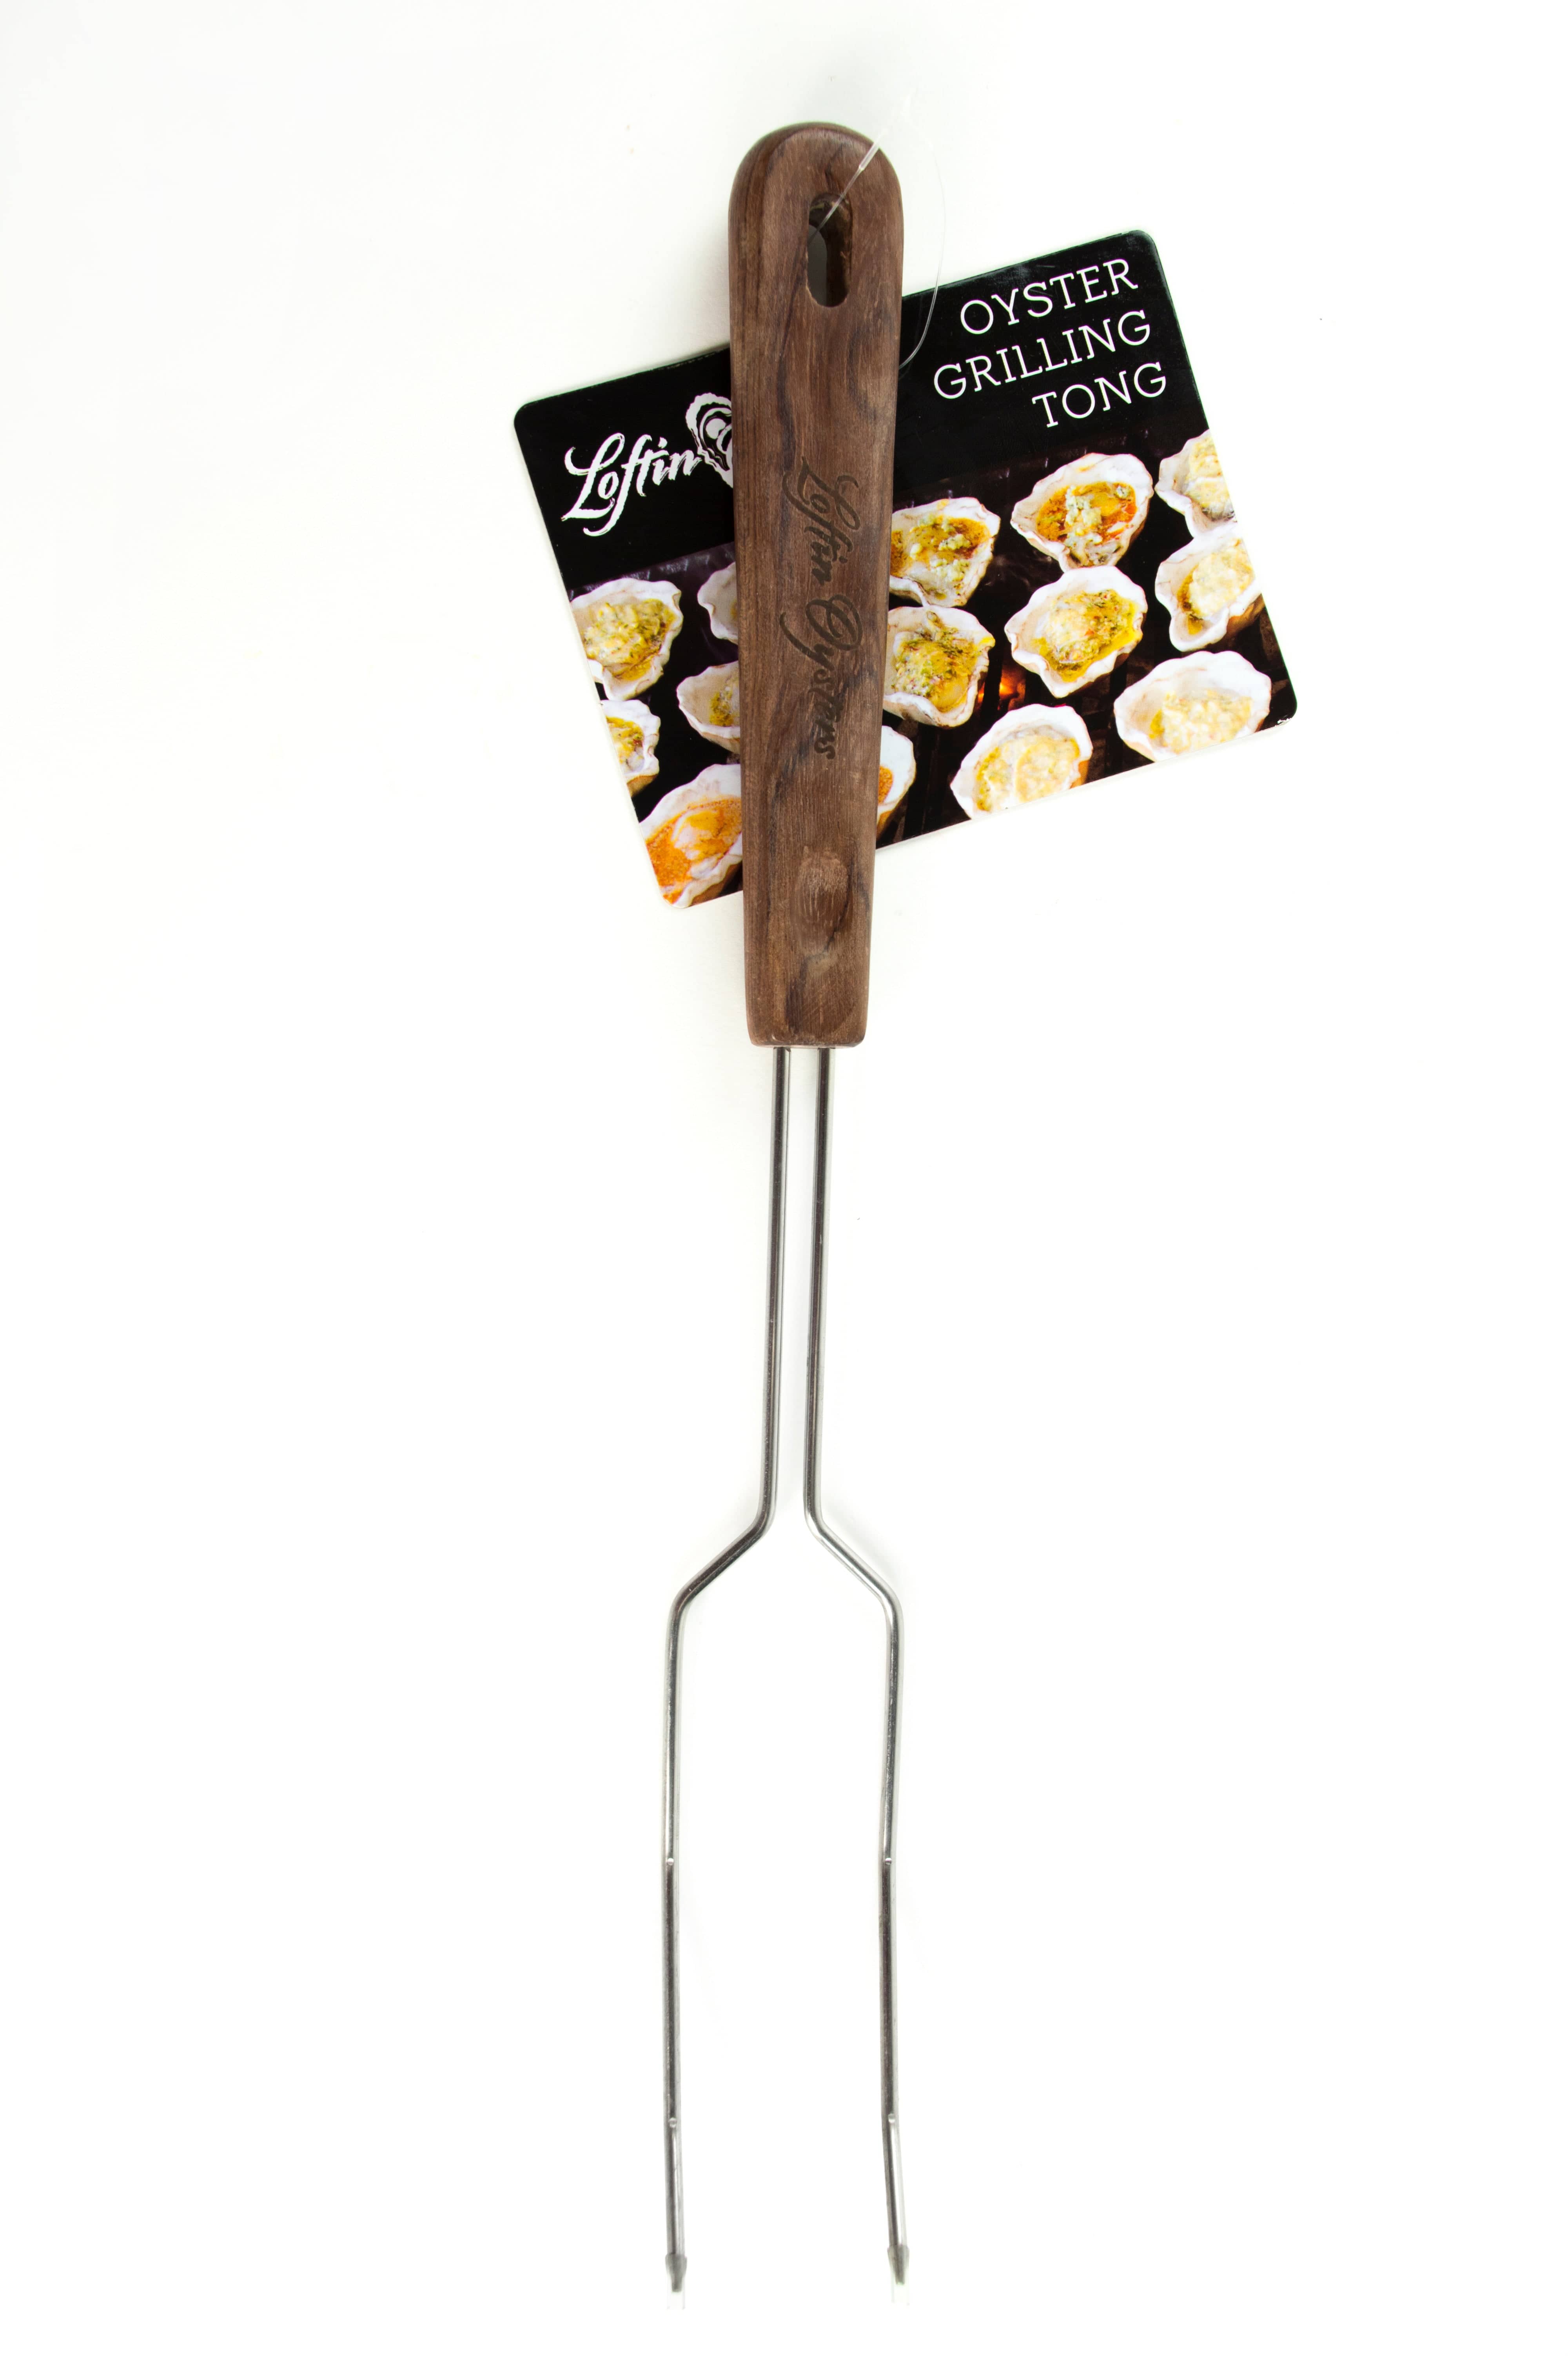 Loftin Oysters Llc Loftin Oyster Grilling Tongs - Little Miss Muffin Children & Home